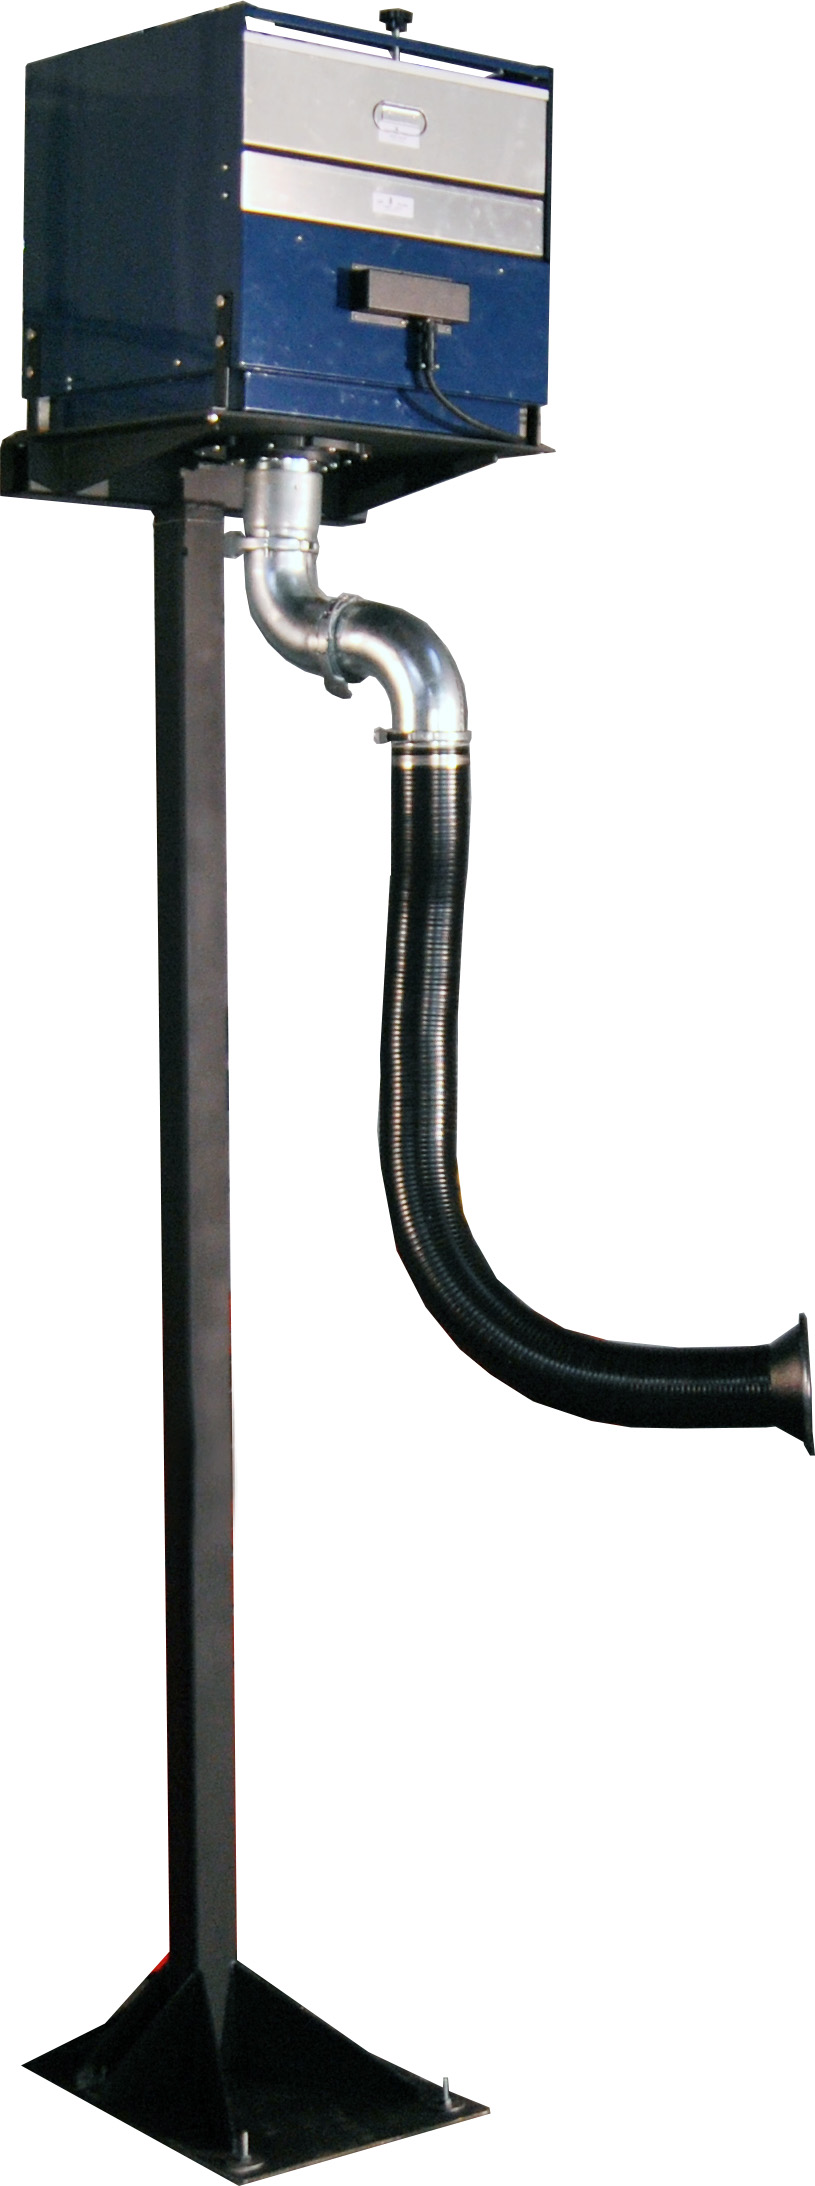 If your application requires an elevated fume extraction system but there is limited wall space, or you are unable to mount to a wall, simply mount our fume extractor with Sky Sentry arm to the stand to attain the desired elevation.